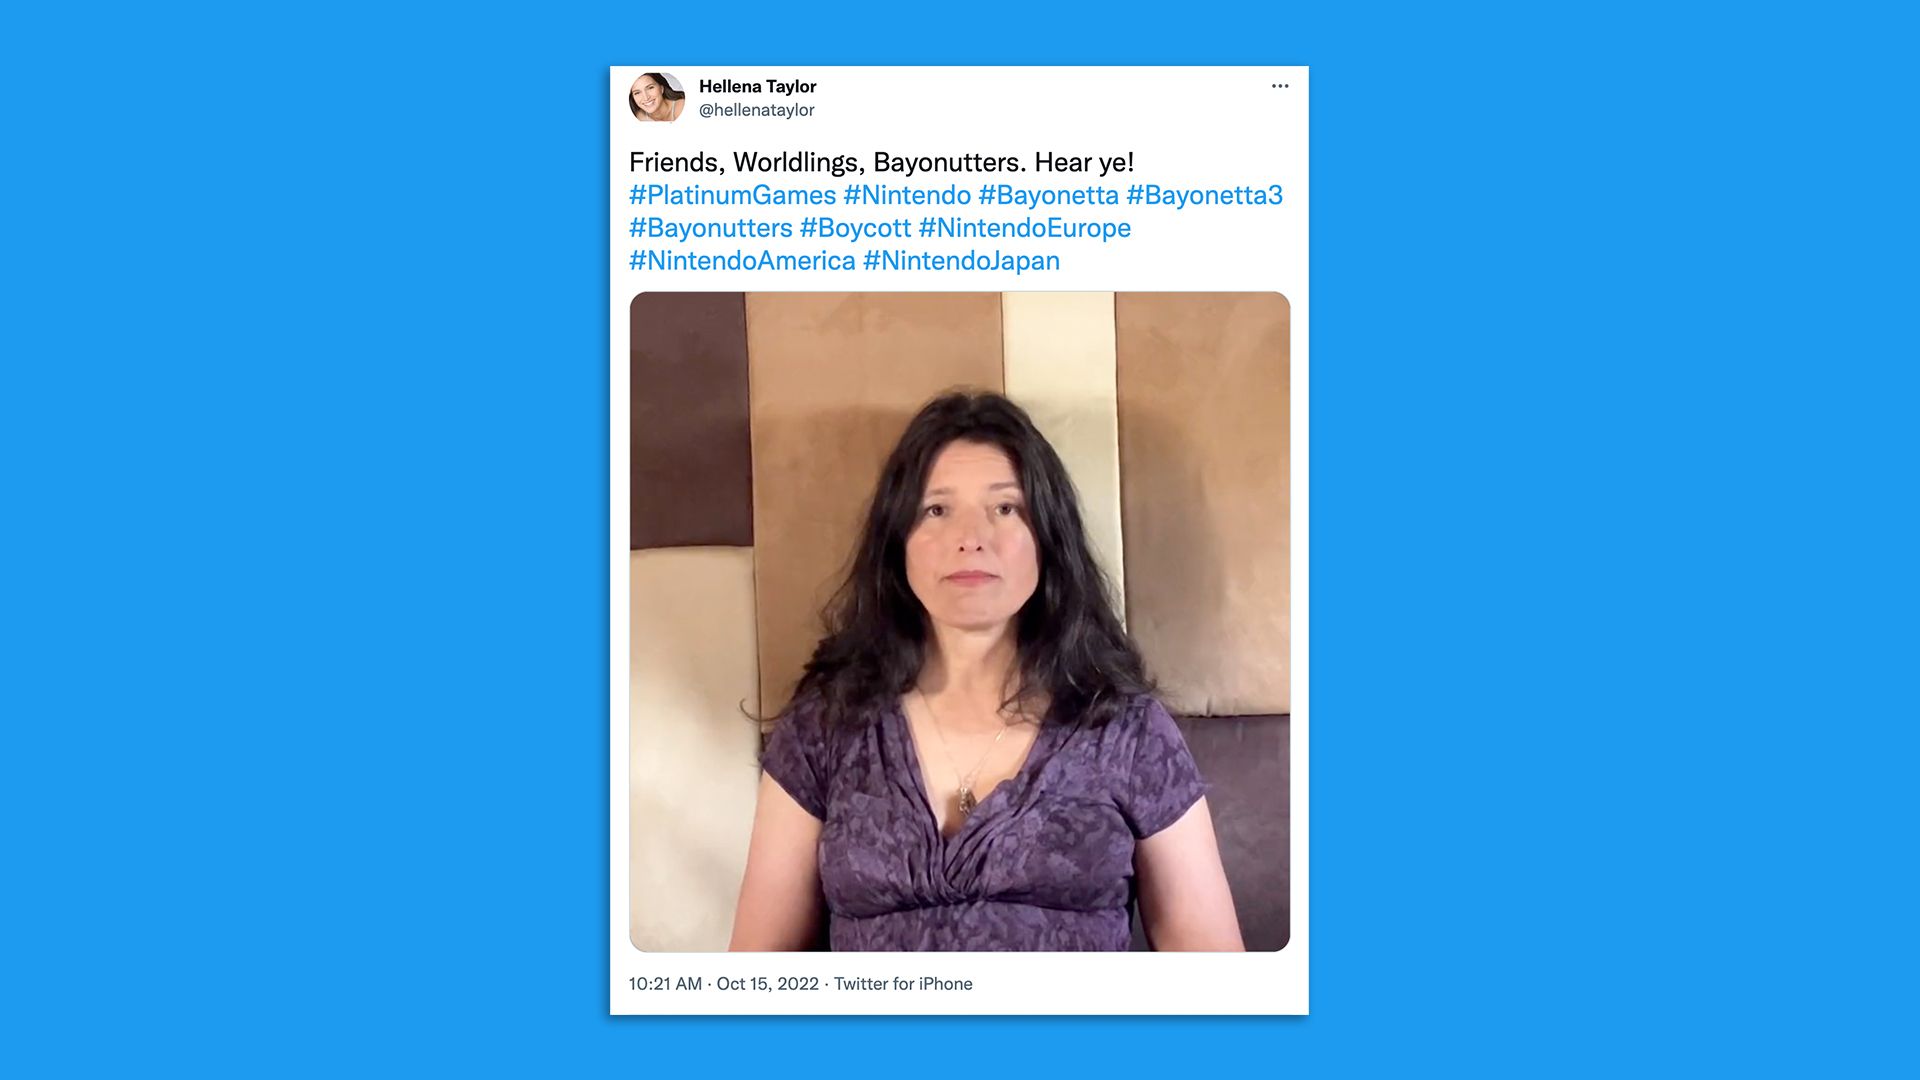 Screenshot of a Tweeted video of a woman talking into a camera. Her Tweet includes hashtags for Bayonetta, Platinum Games and Nintendo